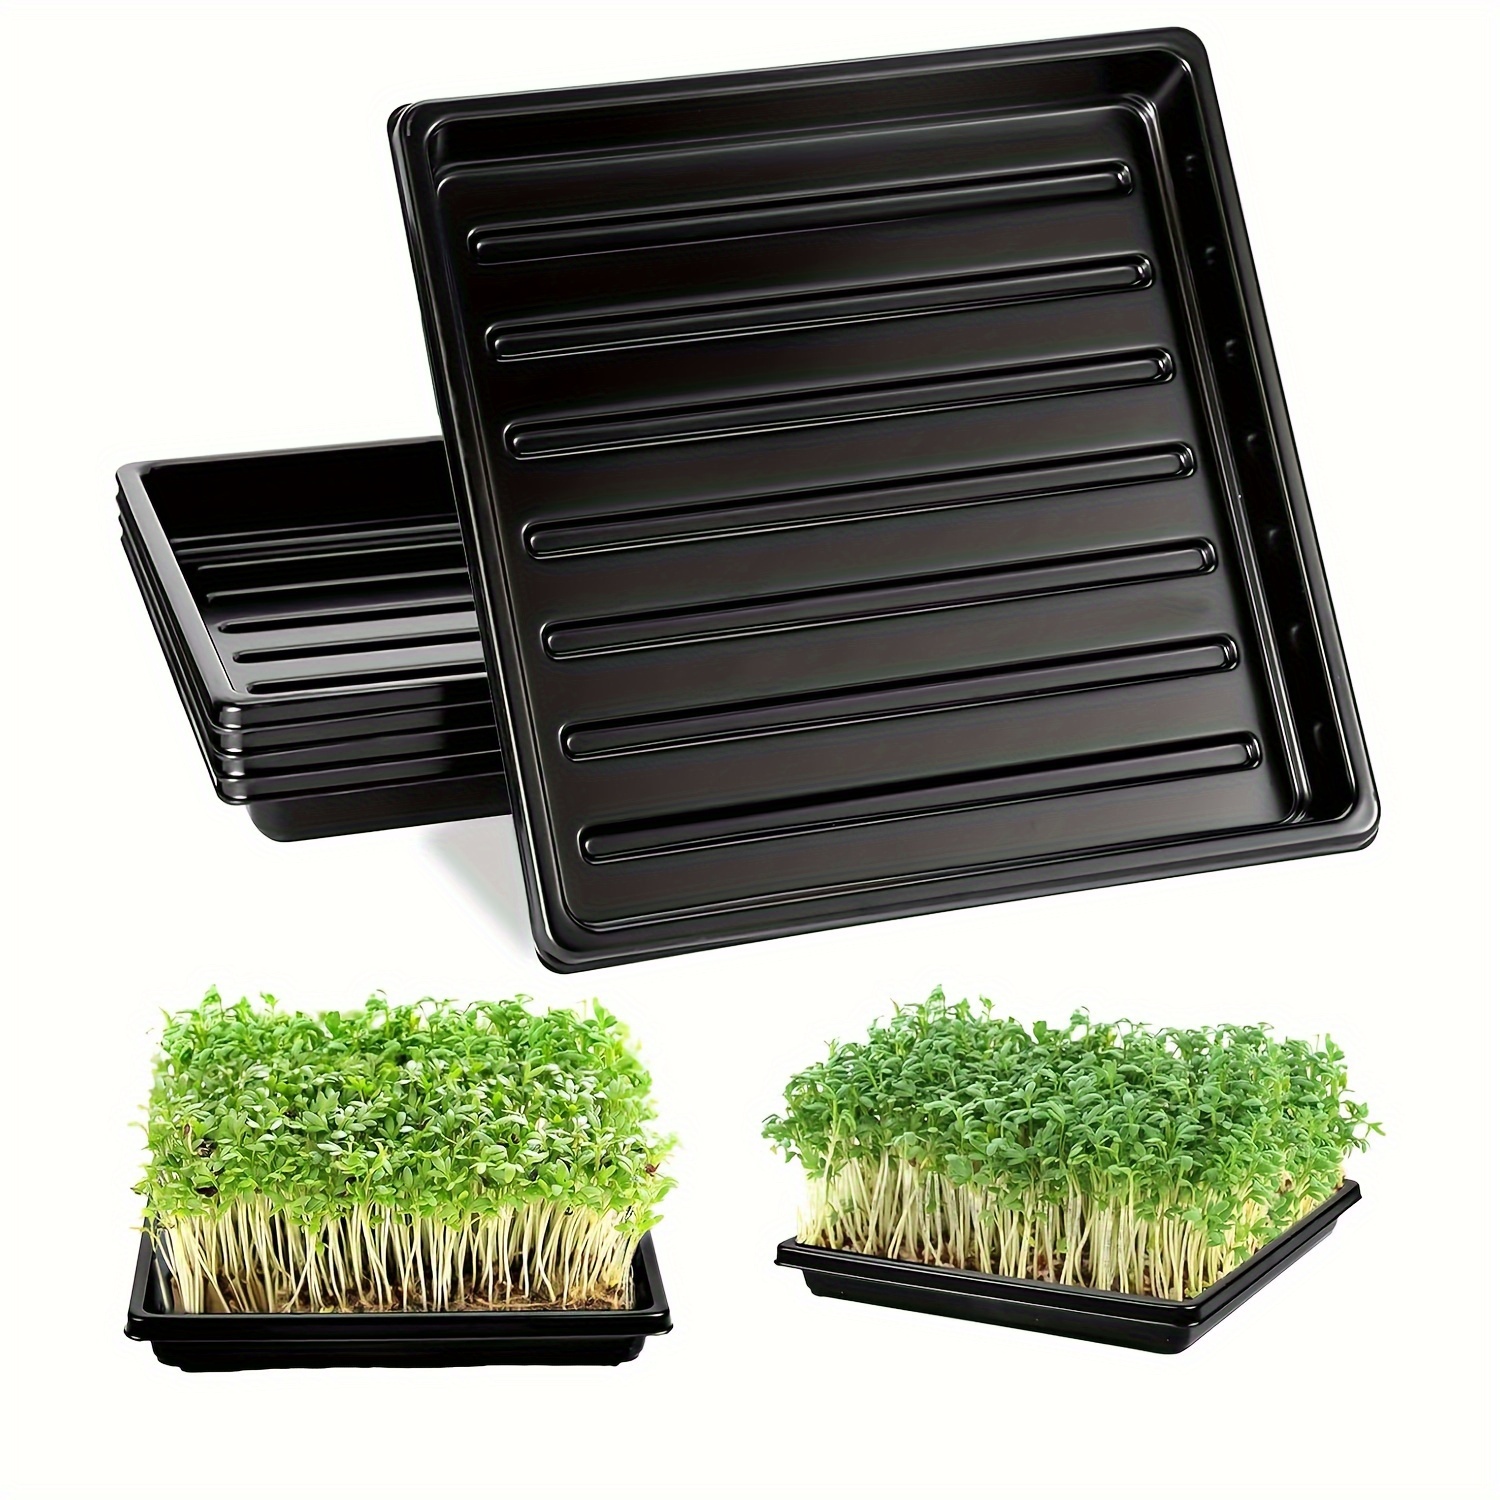 

5 Packs, Garden Plant Growing Trays Without Holes 10" X 10" No Drain Holes Microgreens Growing Trays, Seedling Tray, Wheatgrass Sprouting Tray, Hydroponic Trays, Greenhouse Seed Starter Trays (black)